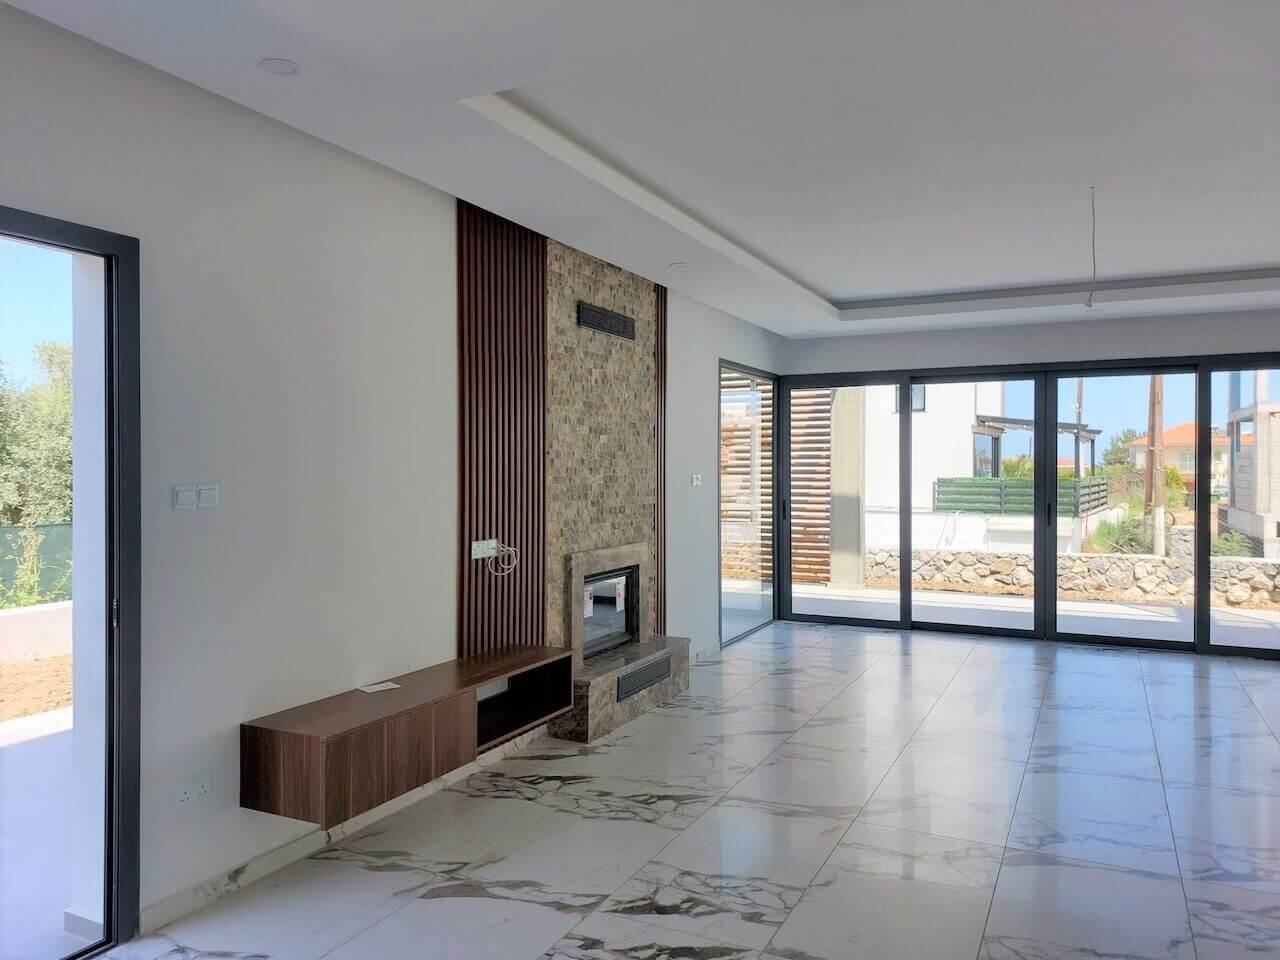 Catalkoy Town Ultra- Modern Villa 3 Bed - North Cyprus Property A5